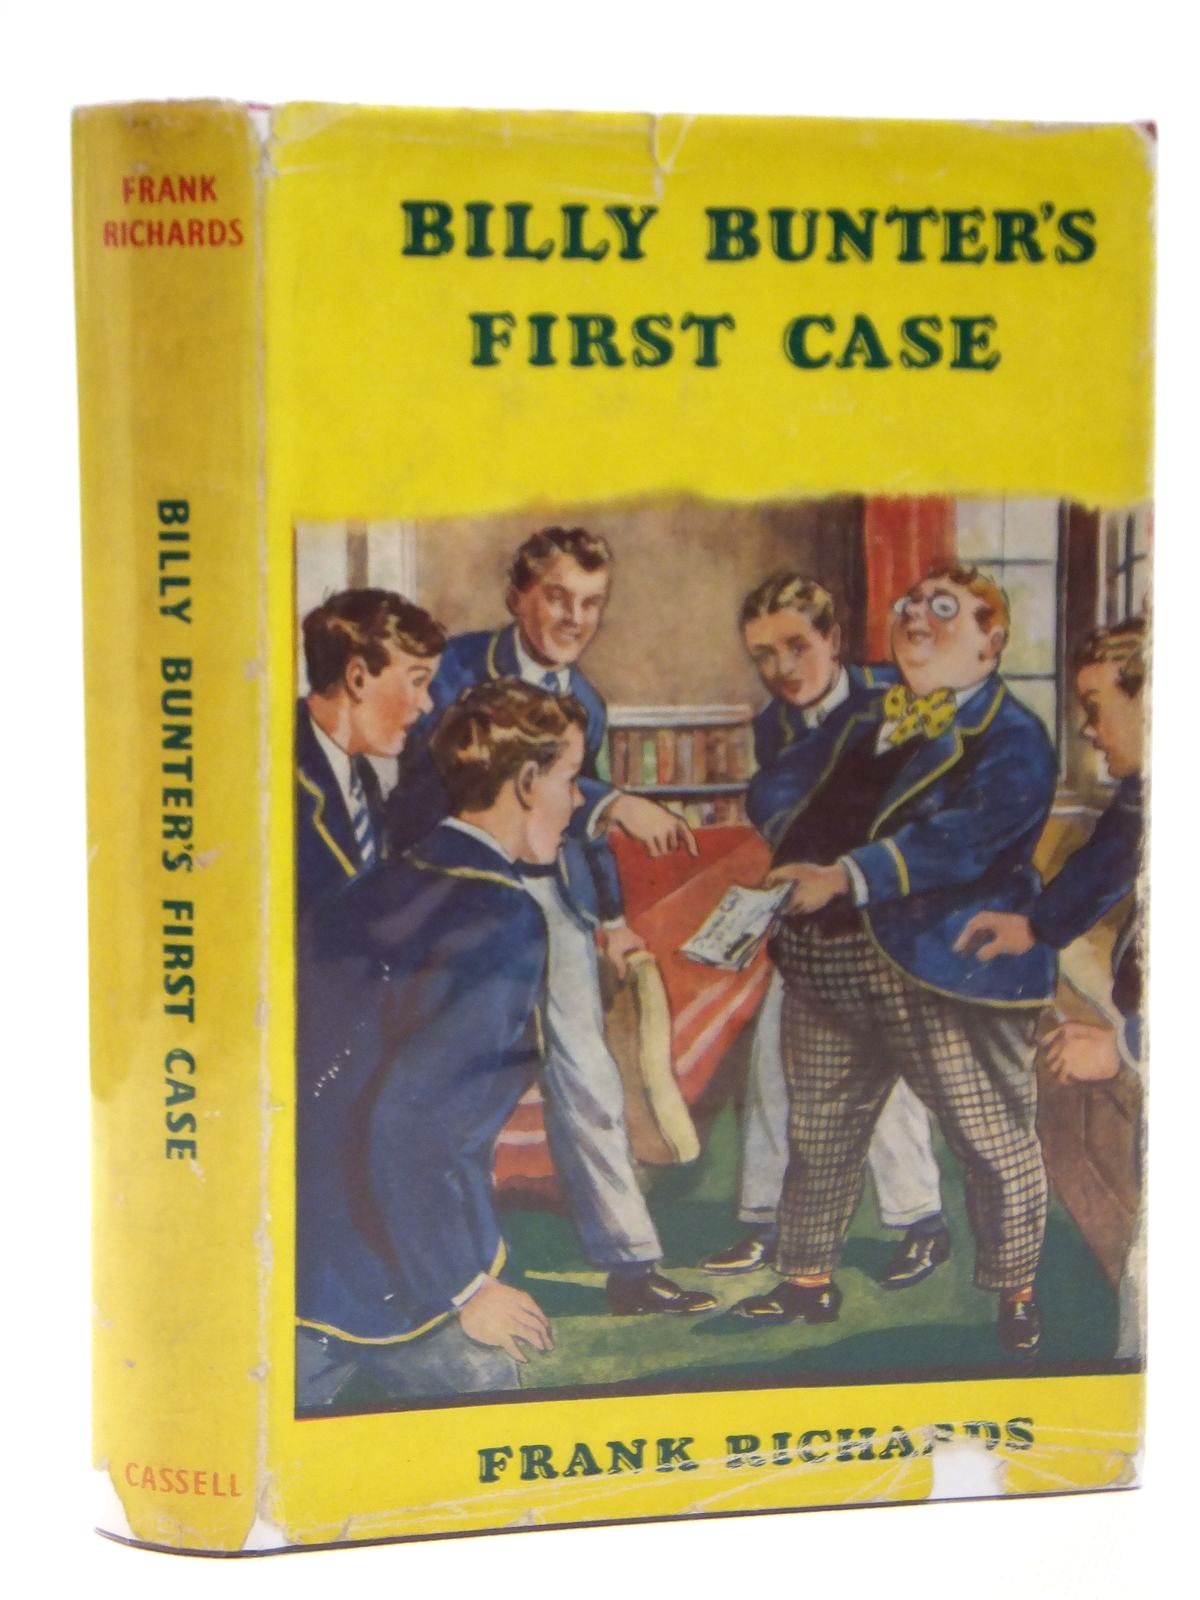 Cover of BILLY BUNTER'S FIRST CASE by Frank Richards